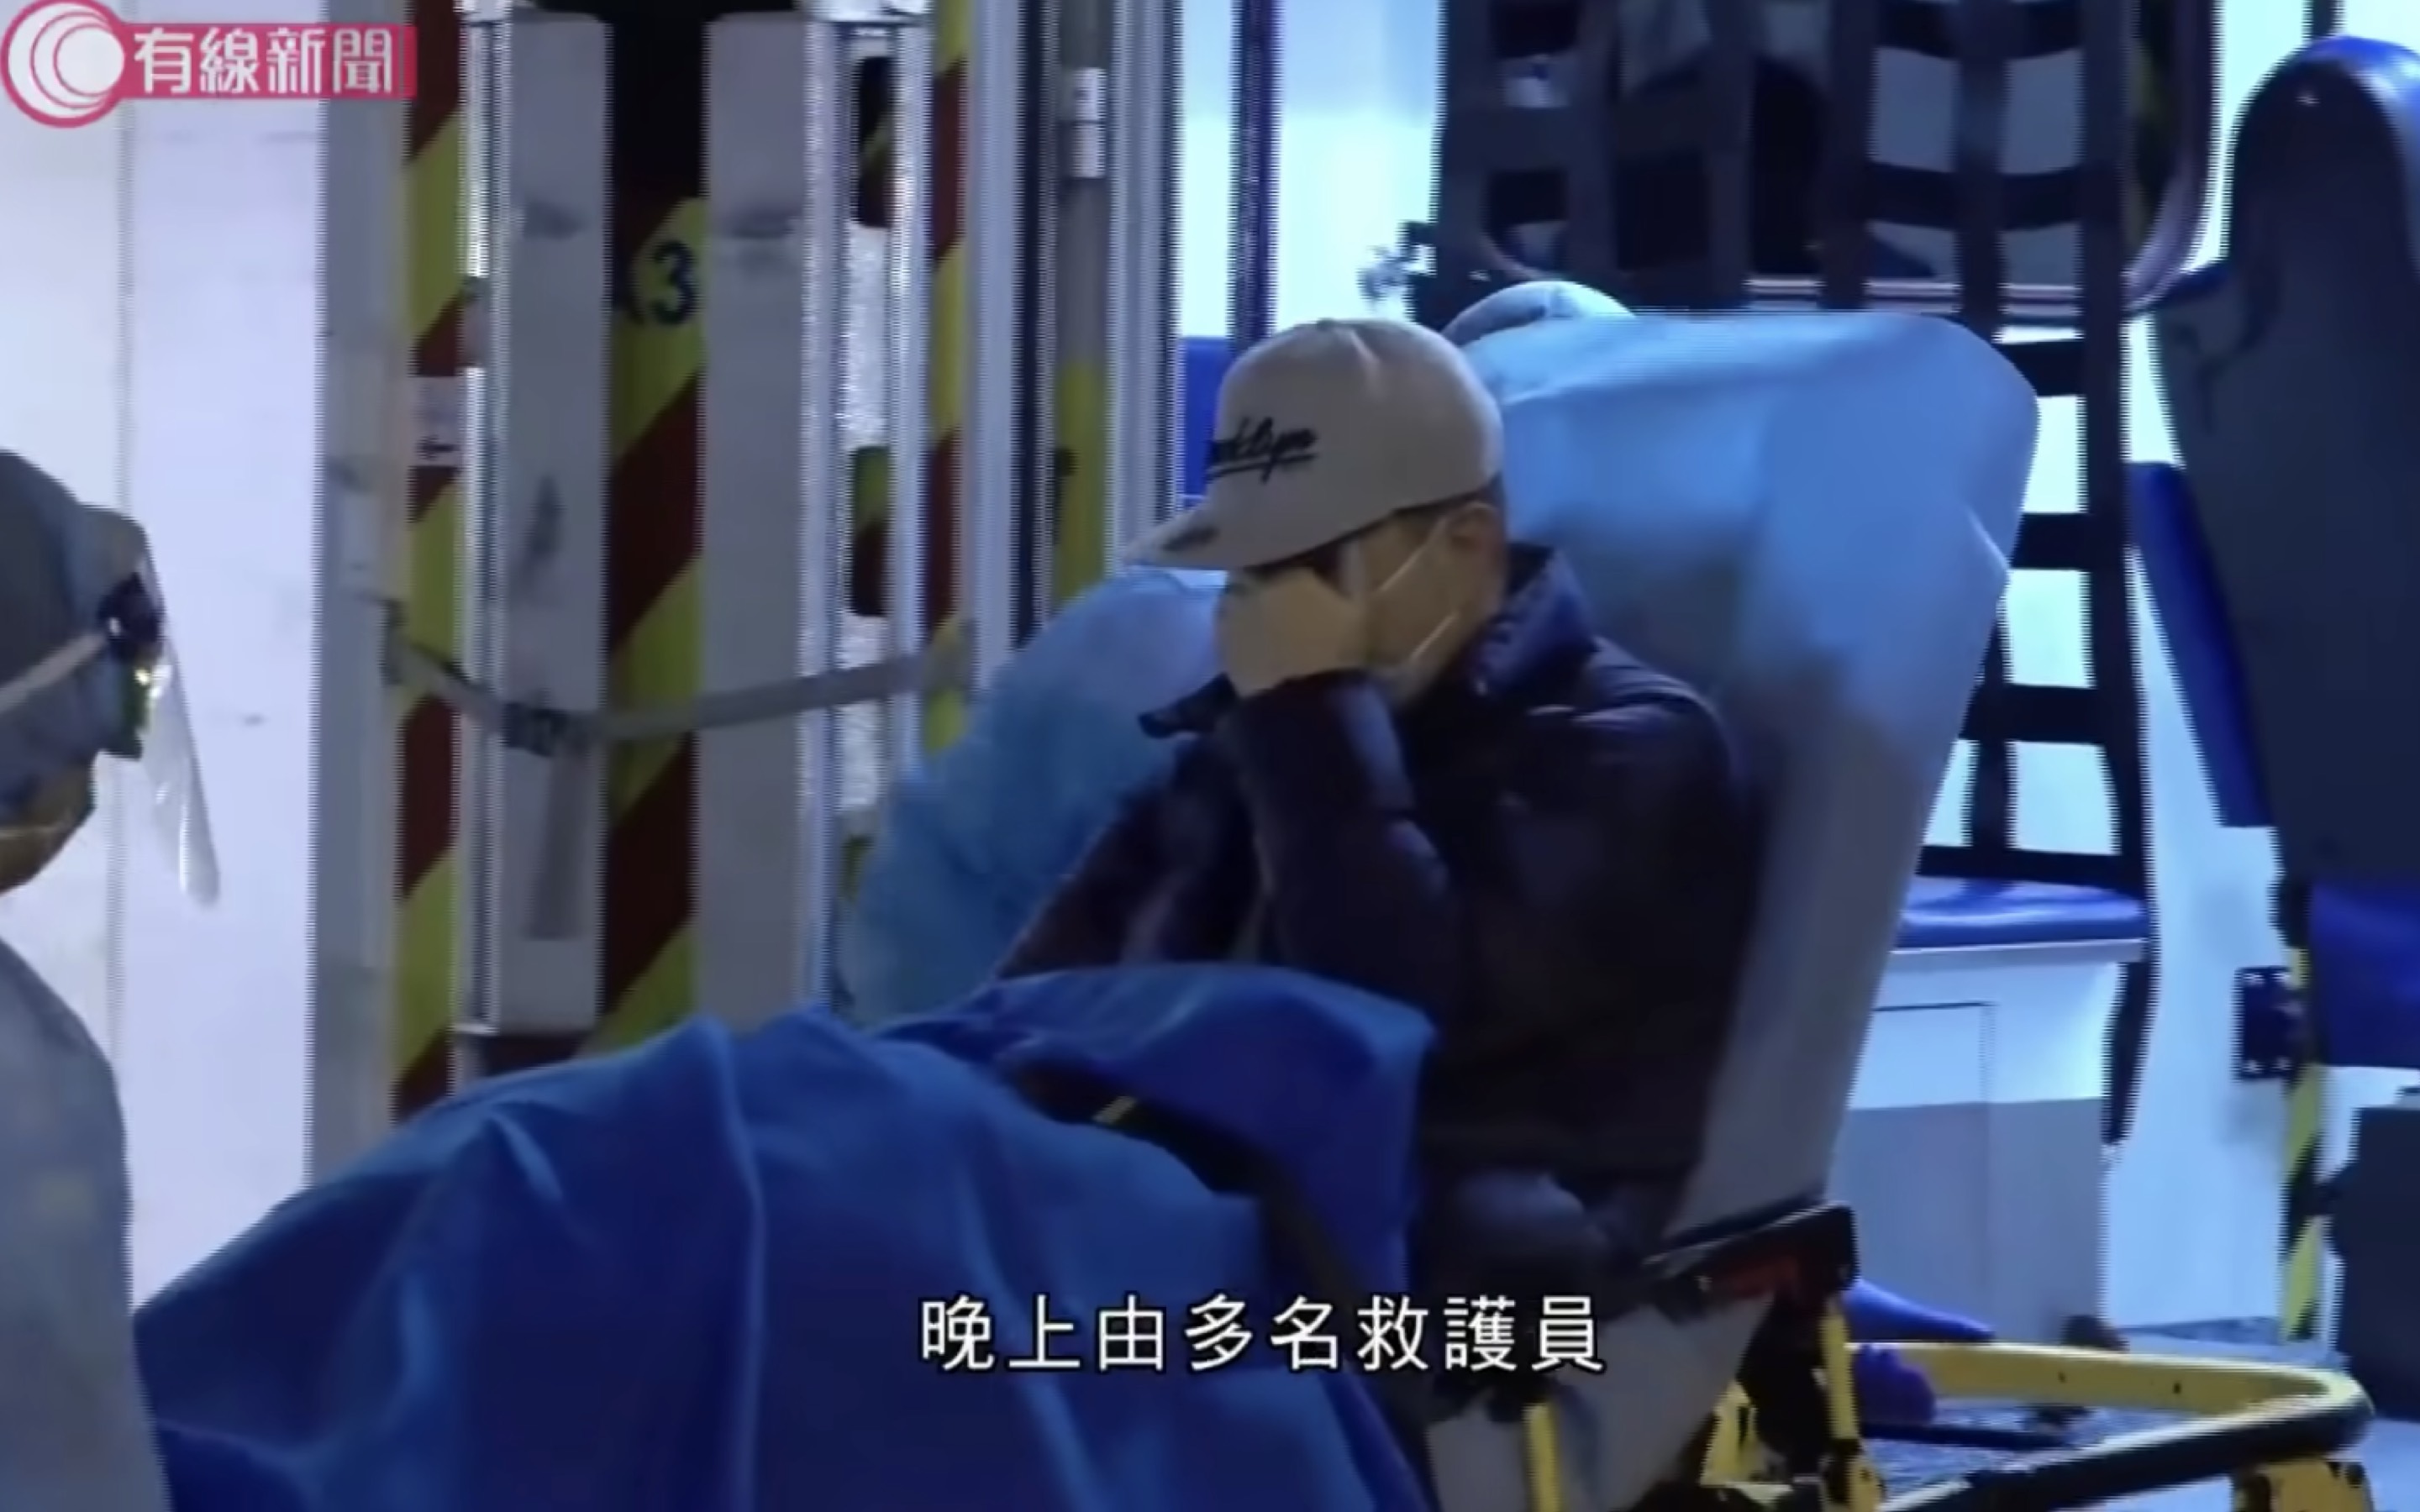 A 39-year-old man is being reported as the first person in Hong Kong to die of the Wuhan coronavirus. Screengrab via YouTube/iCable.